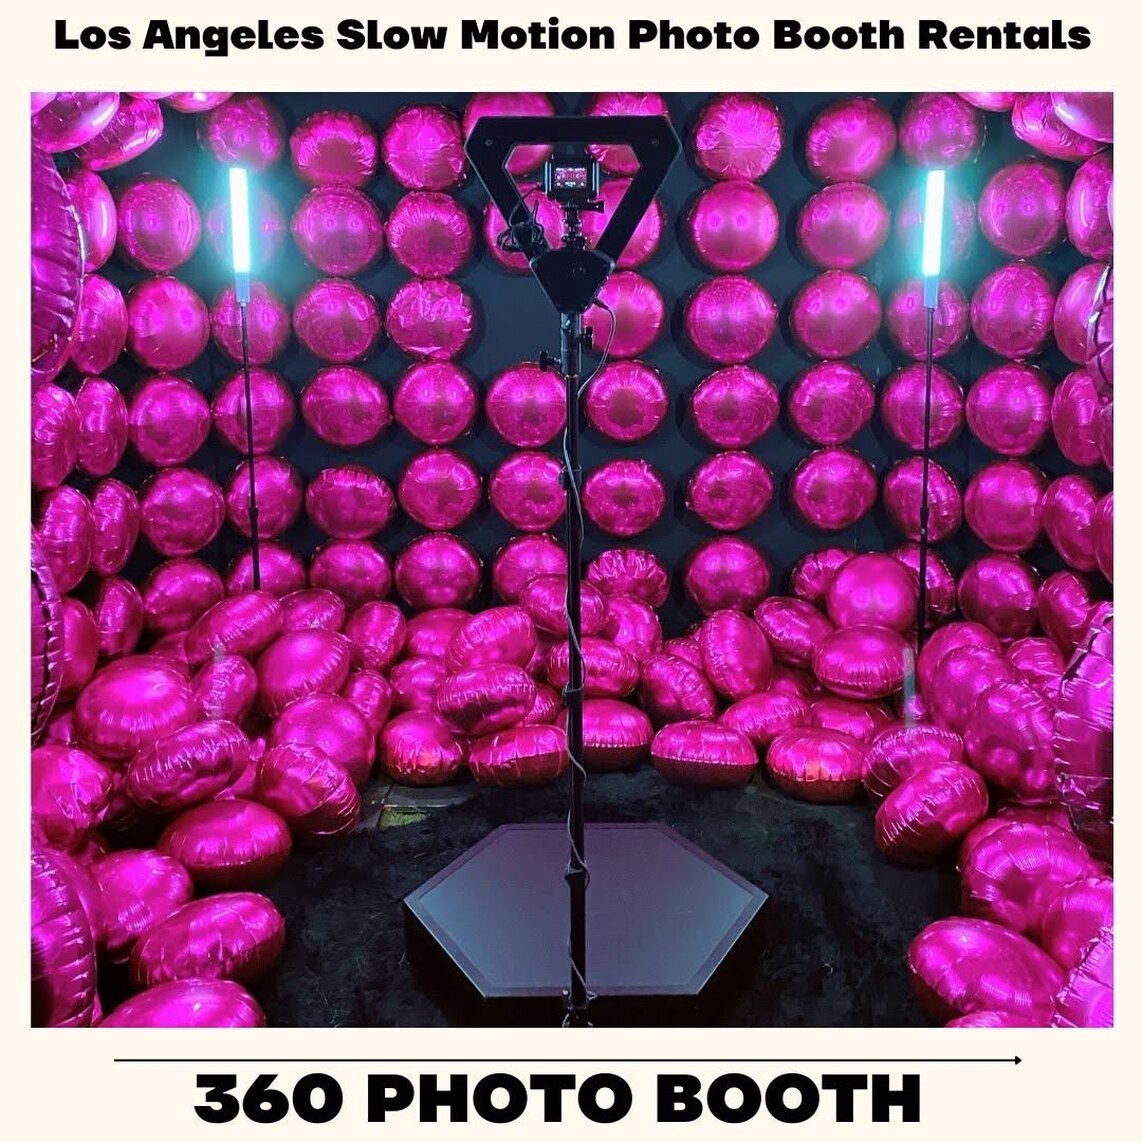 corporate photo booth, party photo booth for rent, party photo booth rental,birthday party photo booth rentals, party photo booth props, party city photo booth frame, party photo booth diy, party photo booth for hire, photo booth for corporate events, party photo booth hire, party photo booth for sale, birthday party photo booth, party photo booth rental near me, graduation party photo booth rental, corporate photo booth ideas, corporate photo booth props, corporate photo booth hire, corporate photo booth backdrop, party photo booth near me, party photo booth set up, corporate photo booth hire Orange County, party photo booth hire OC,party photo booth hire near me,  corporate event photo booth ideas, corporate photo booth frame, corporate photo booth rental Irvine, corporate photo booth Anaheim, corporate photo booth OC, corporate photo booth Los Angeles, party photo booth design, party photo booth rental Beuna Park, party photo booth to hire, photo booth and corporate events,  holiday photo booth, holiday photo booth props, holiday props for photo booth holiday photo booth backdrop, santa monica photo booth rental, holiday photo booth ideas, santa photo booth props, holiday photo booth frame, holidays photo booth rental, holiday photo booth OC, holiday party photo booth rental, photo booth for holiday party OC holiday photo booth backdrop, holiday party photo booth backdrop,holiday photo booth rental, holiday photo booth templates, holiday photo booth backdrop, holiday photo booth props, holiday photo booth props, holiday party photo booth ideas, 